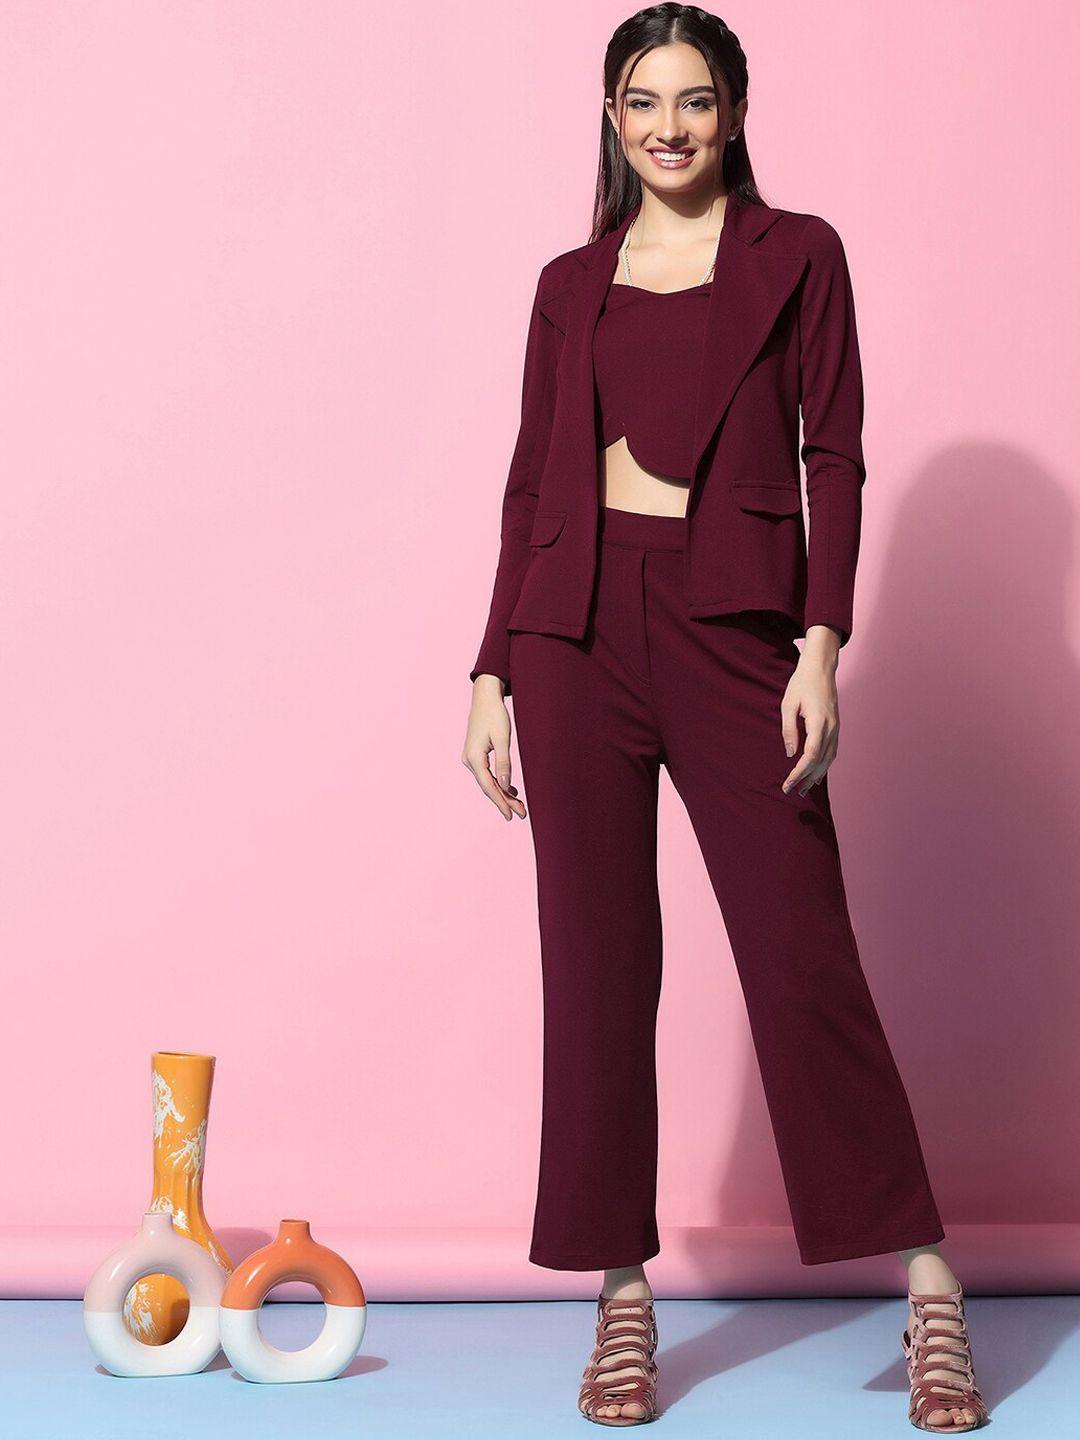 selvia sweetheart neck top & trousers with blazer co-ords